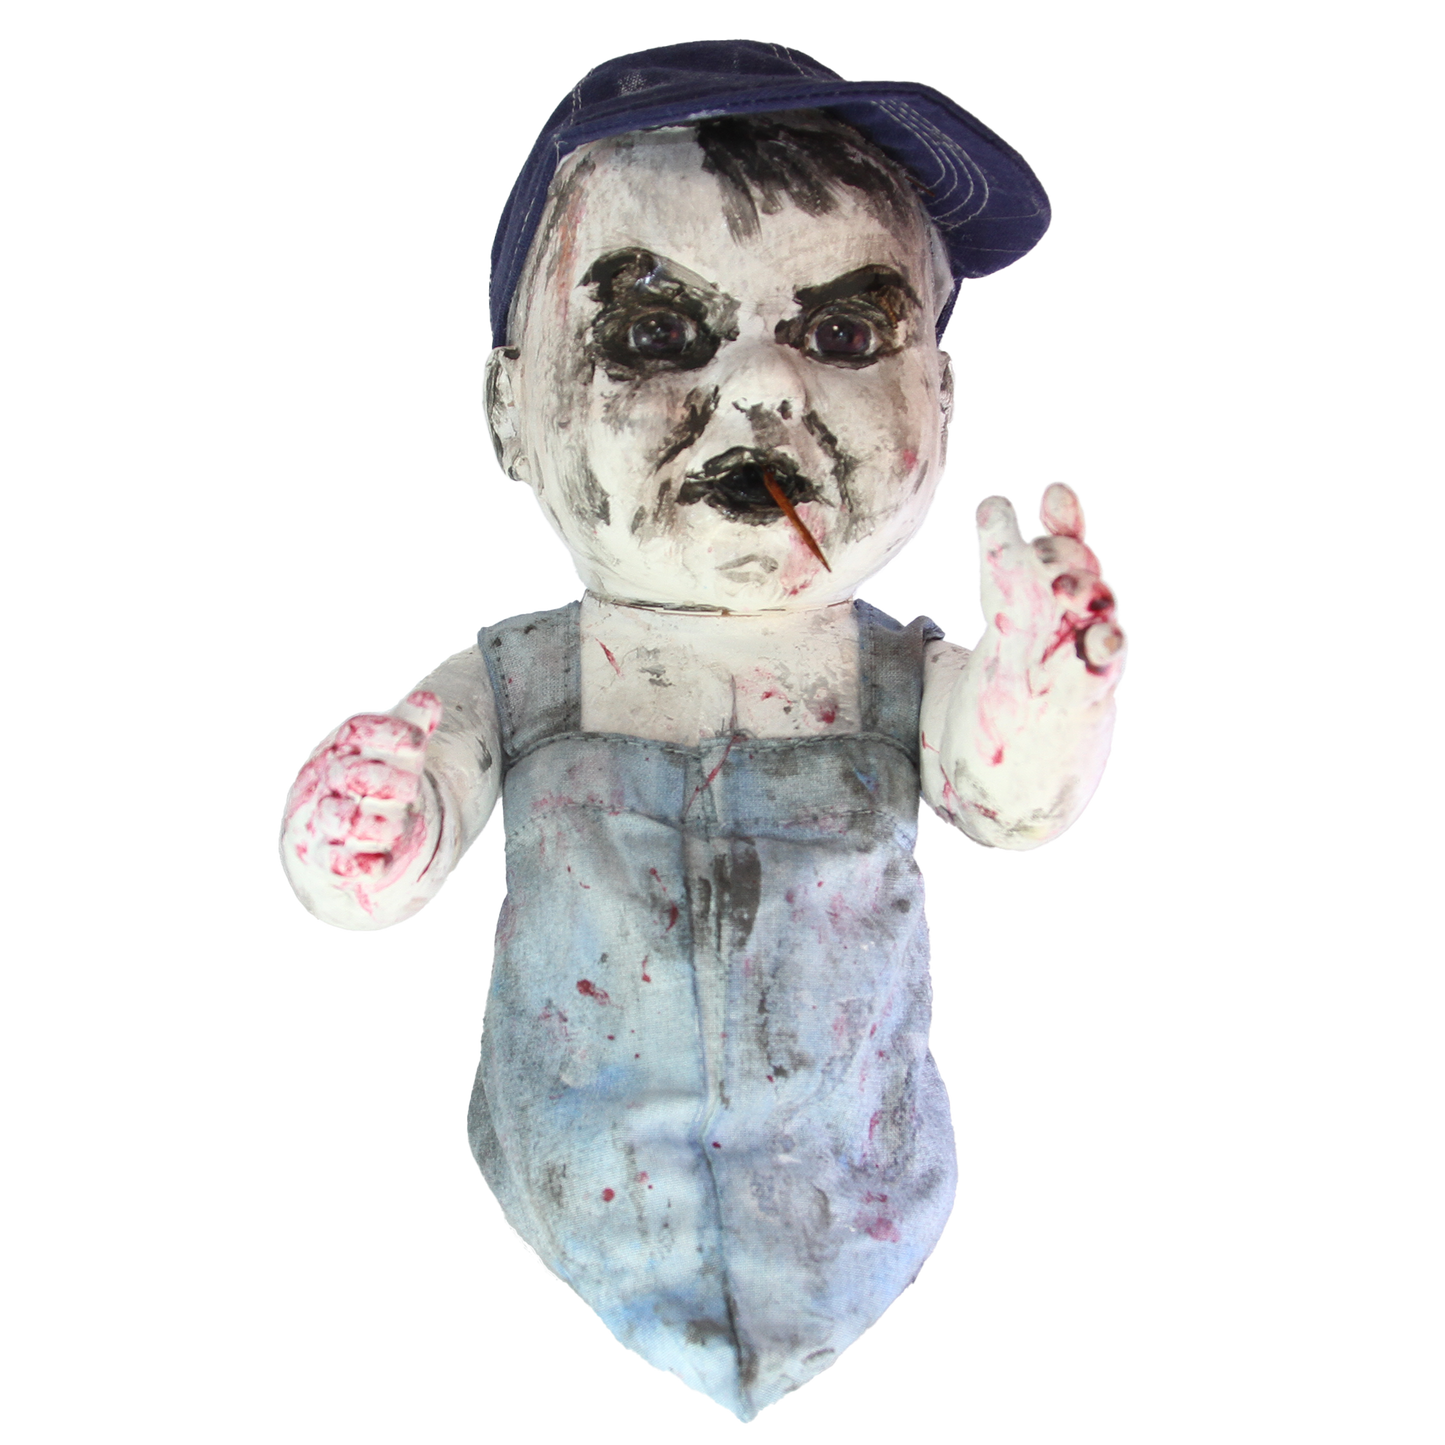 Horror Icon Bill Oberst Jr. Limited Edition™ Large Backwoods Baby in Antique Wood Display Case 13"x7" x 4" Raw Brass Plate, Display Stand (Limited Edition of 3, each OOAK, signed & numbered)